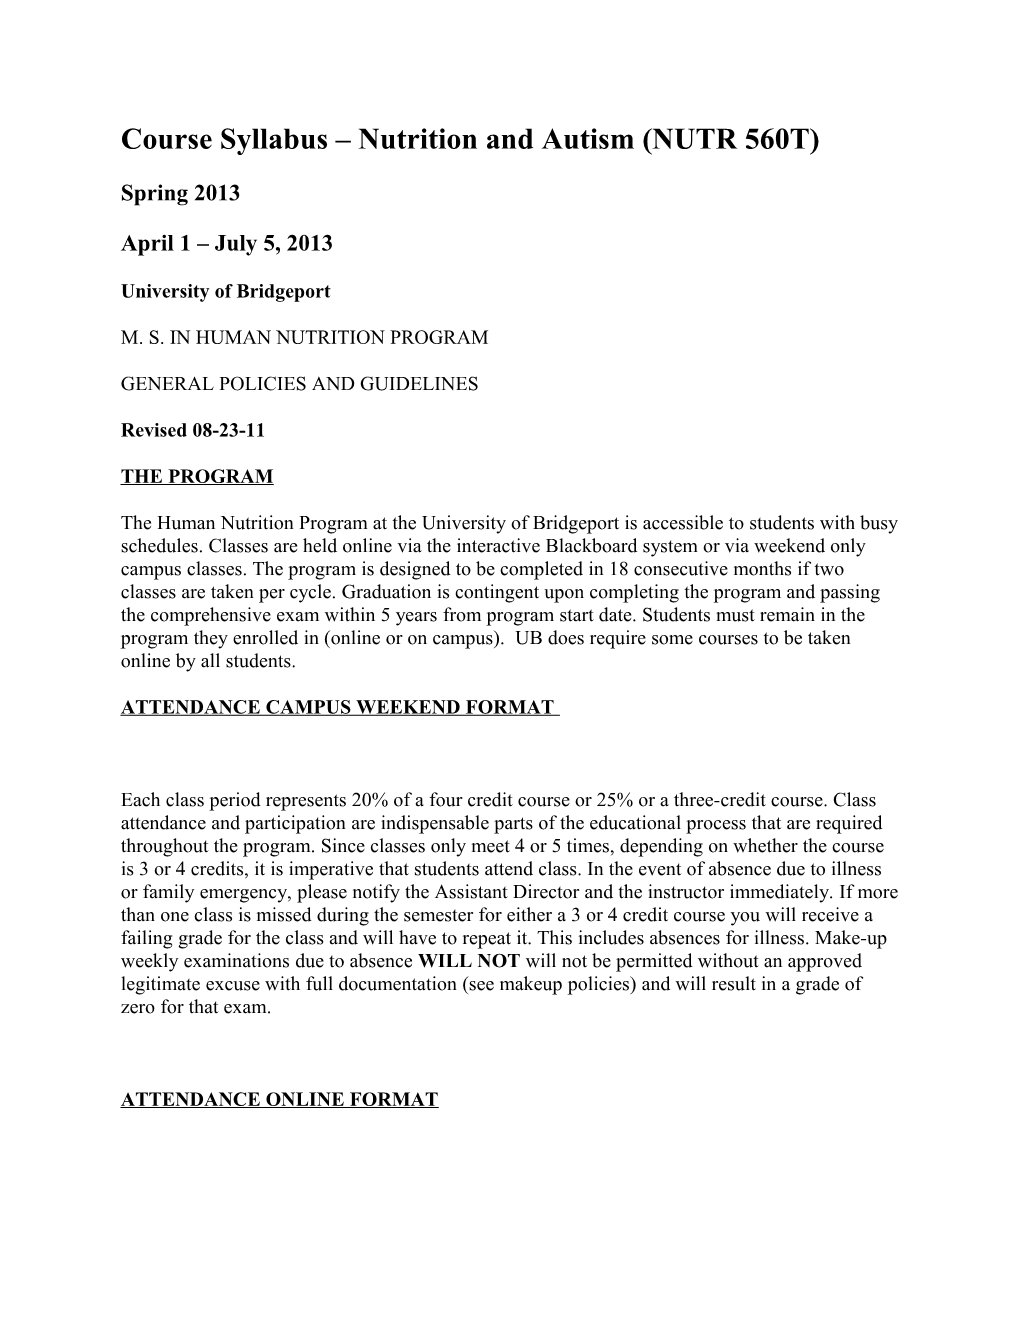 Course Syllabus Nutrition and Autism (NUTR 560T)